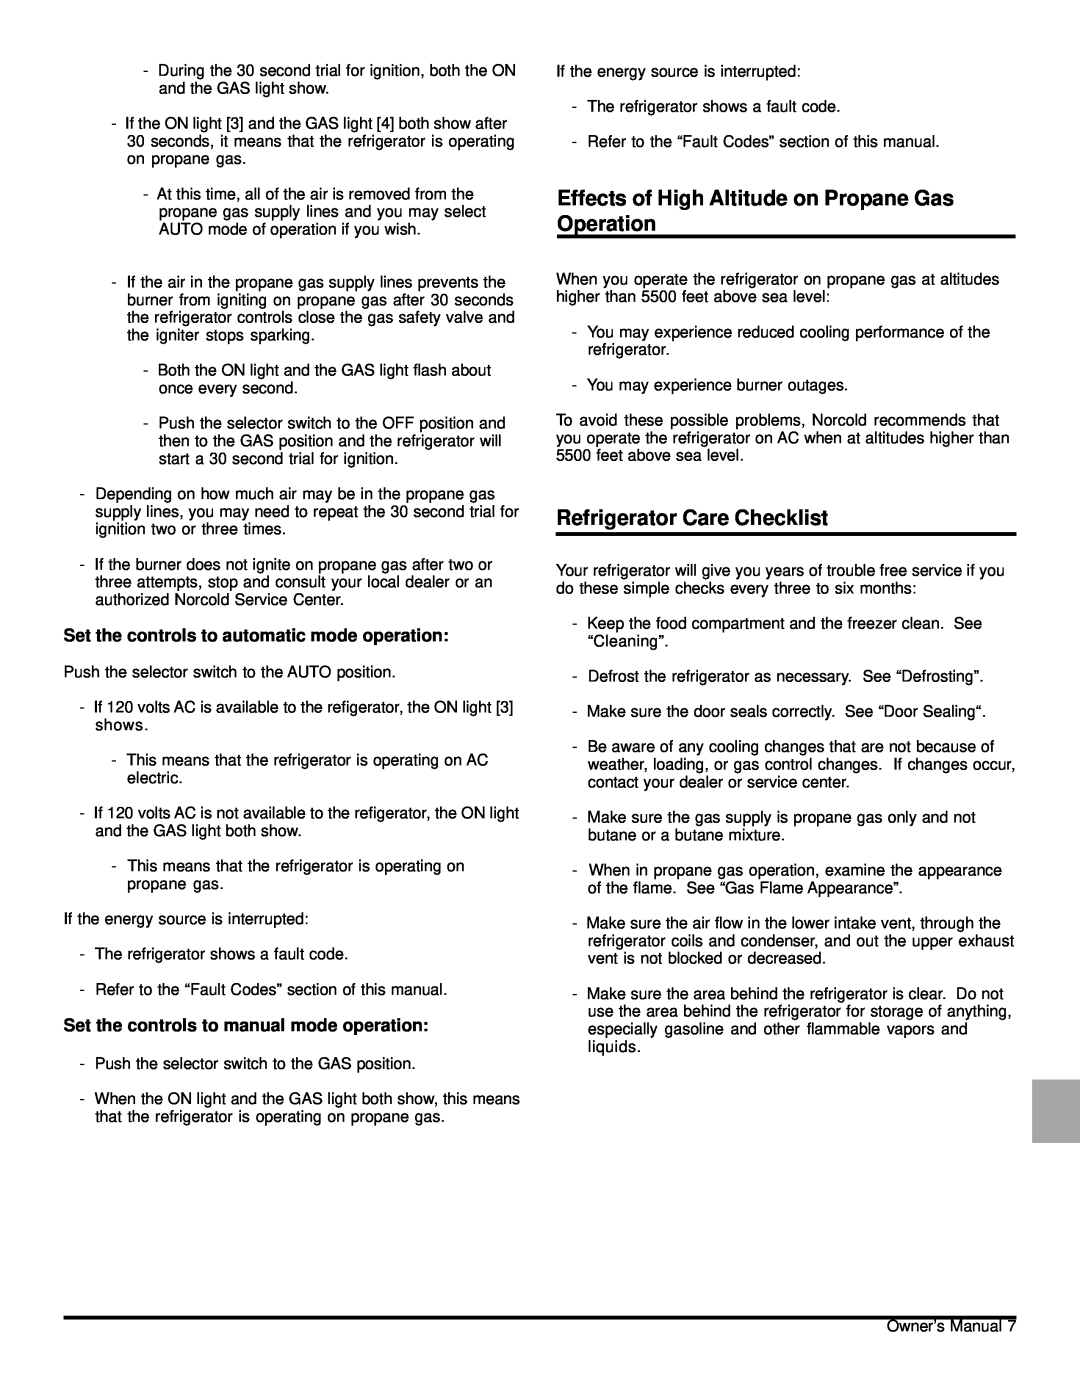 Norcold N61X, N81X owner manual Effects of High Altitude on Propane Gas Operation, Refrigerator Care Checklist 